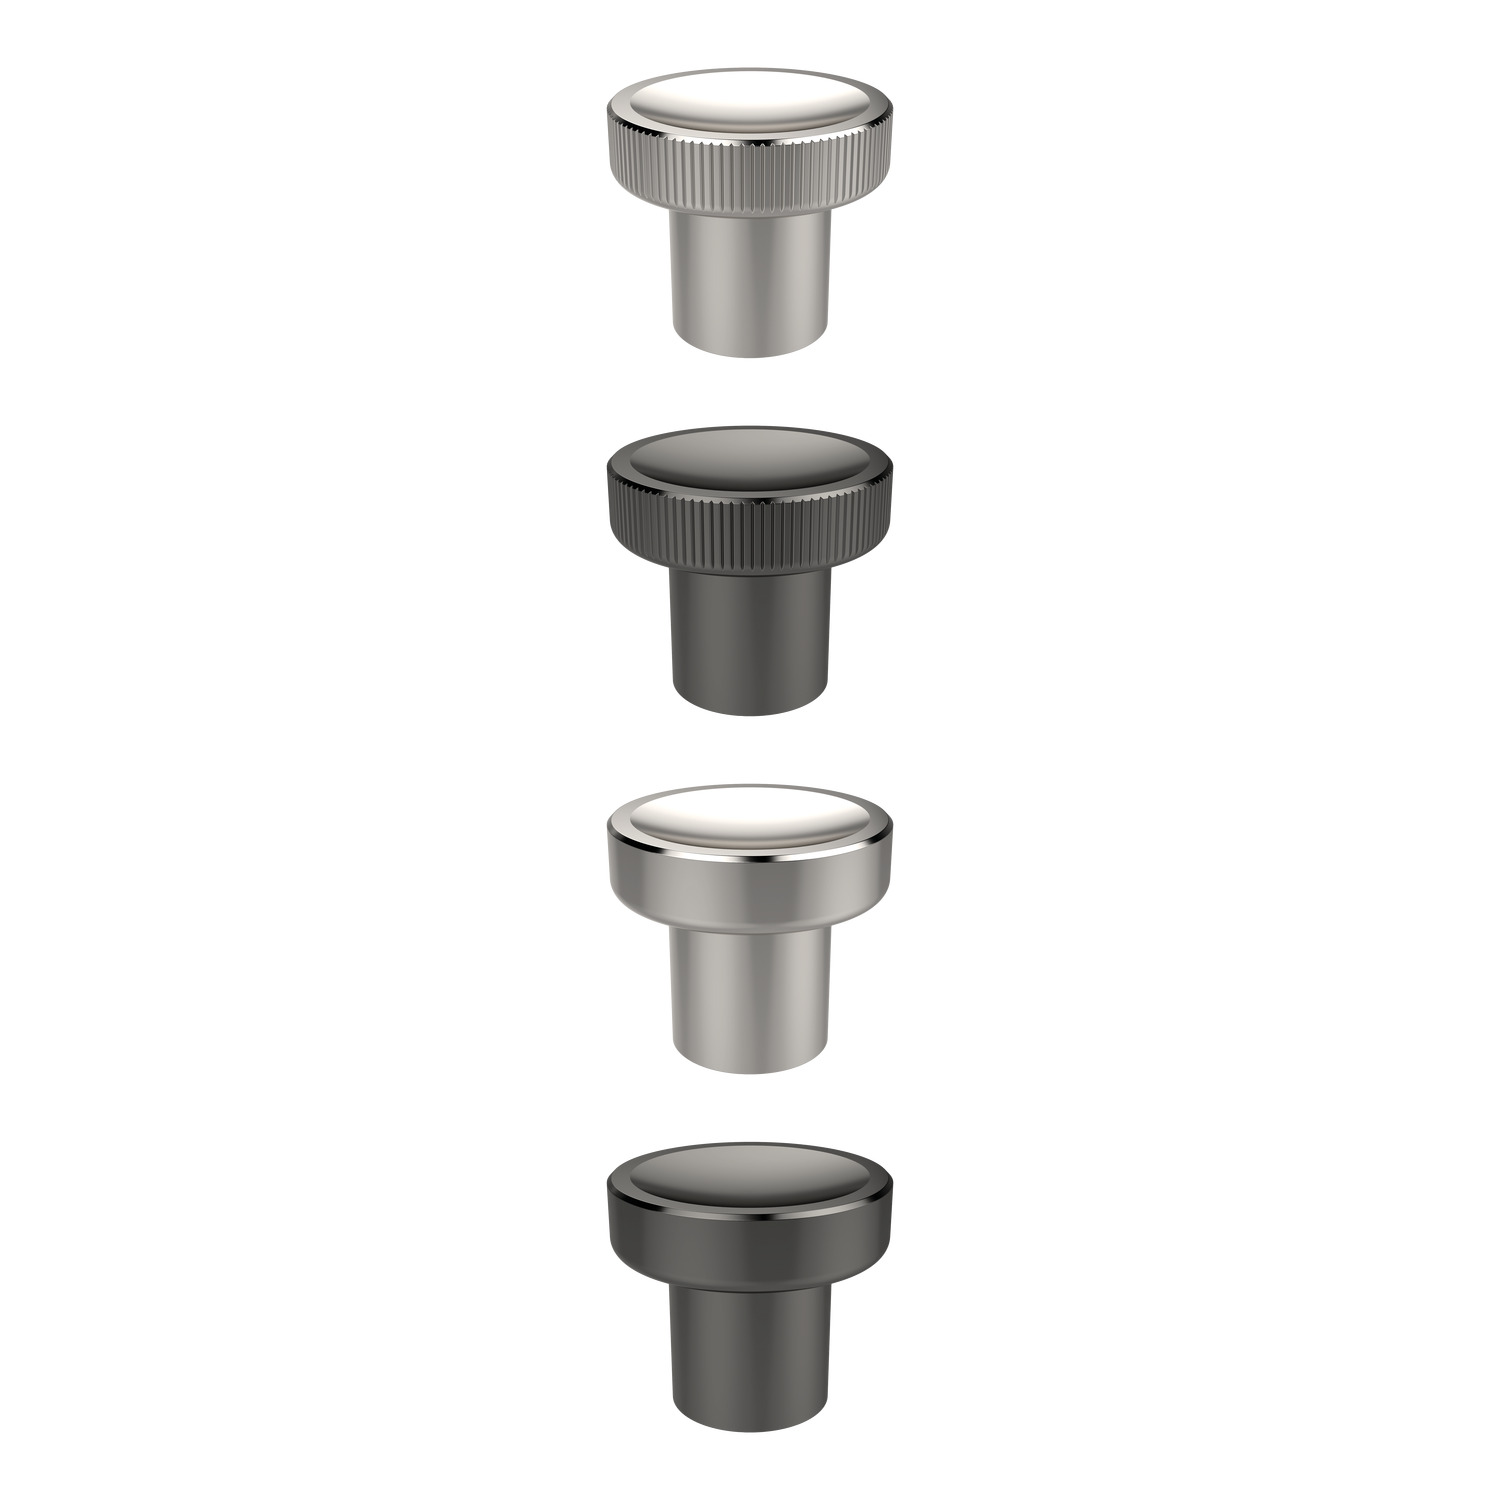 Thumb Knob Simple knobs for where a push or pull movement is required. Available in regular or stainless steel.